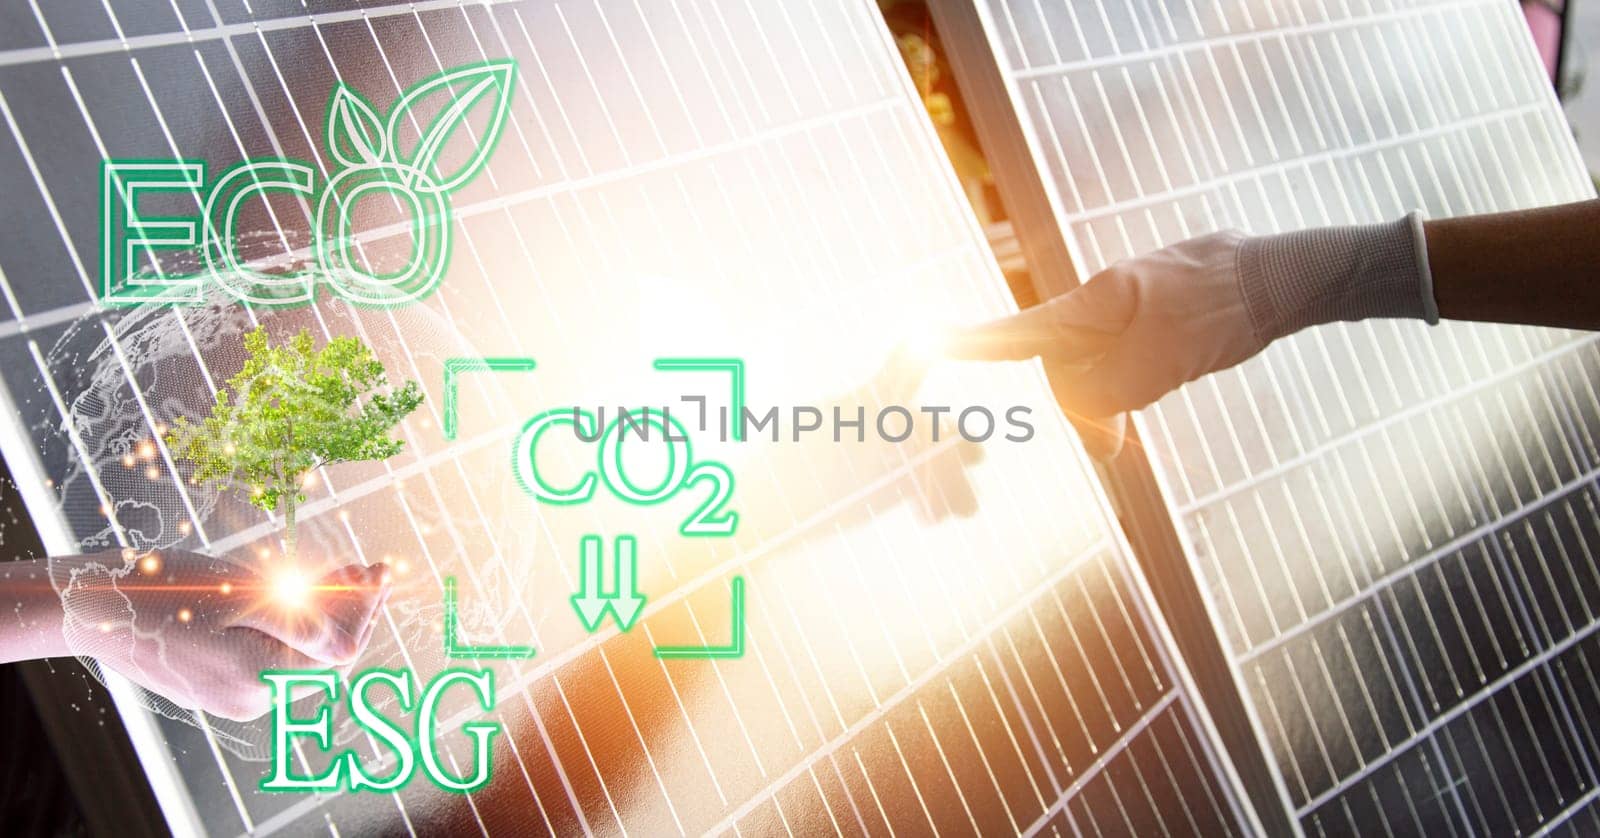 Clean energy concepts such as solar cells are being used more and more.